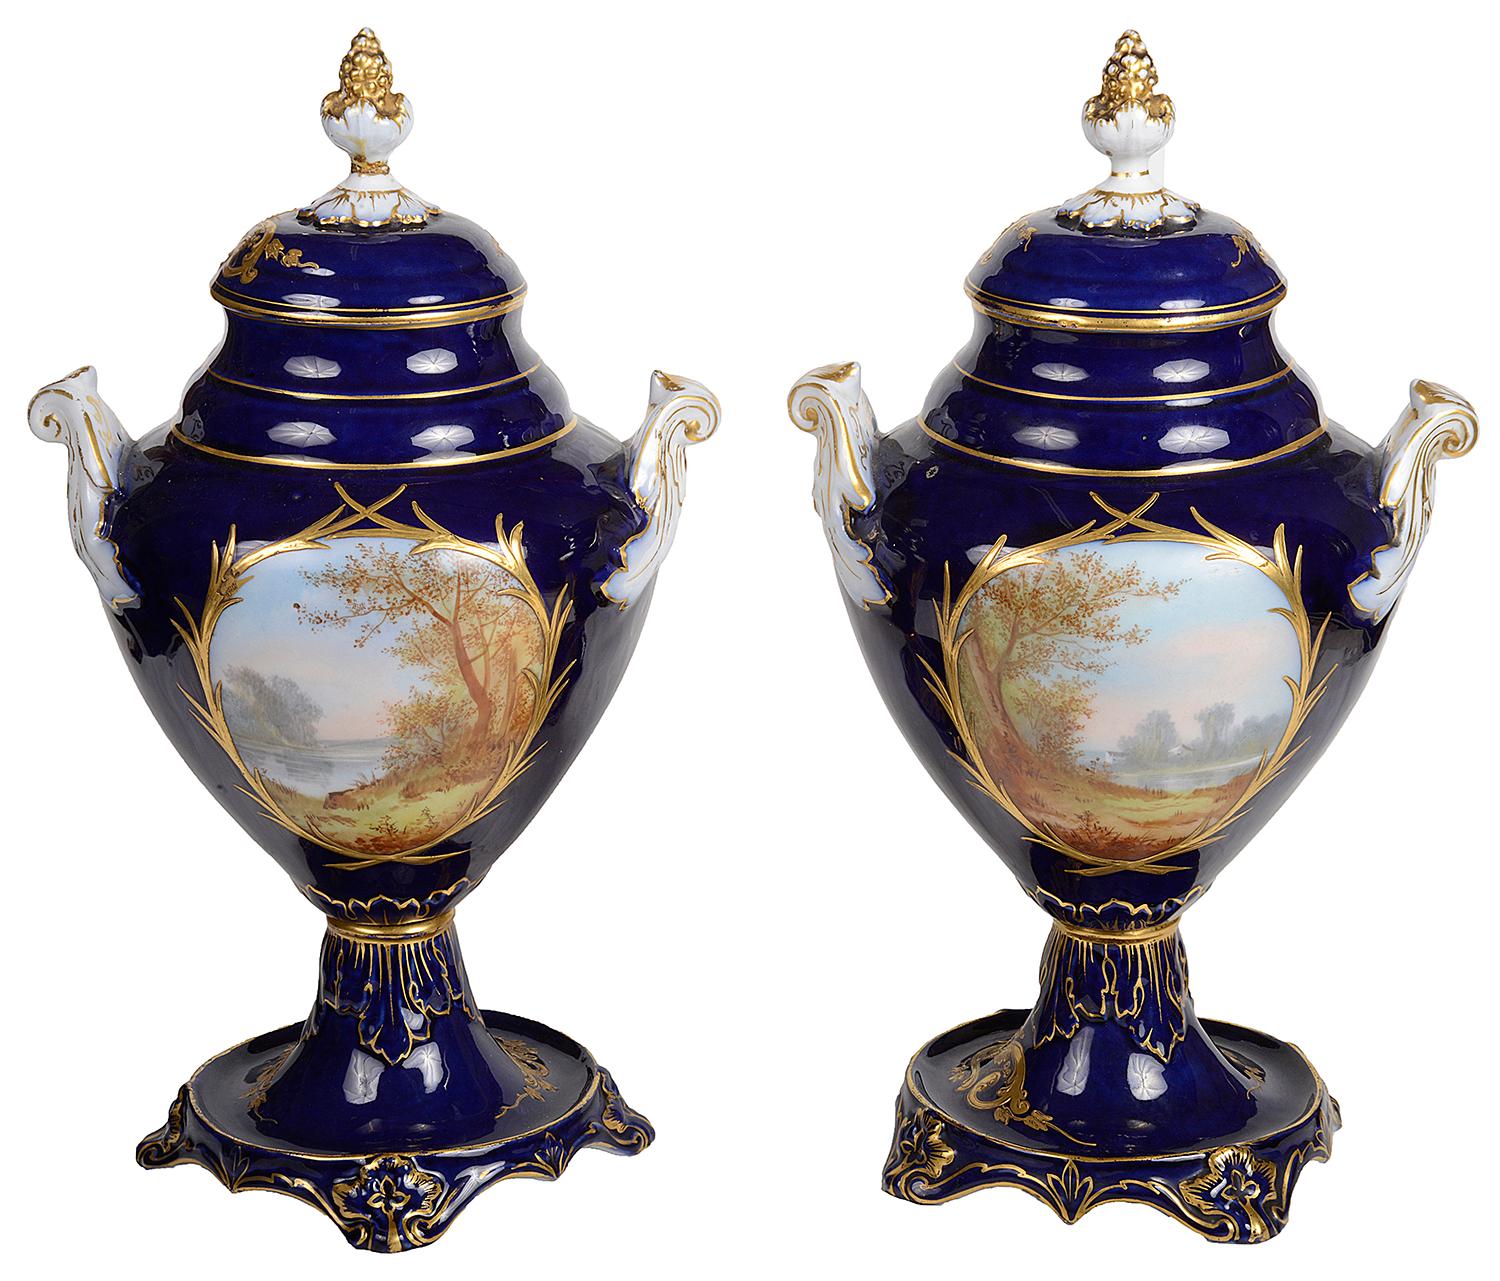 A pair of French Sevres style porcelain lidded vases, each in a cobalt blue ground, berry and leaf finials, classical scrolling gilded decoration, inset painted panels depicting young lovers, scrolling handles to either side. Measures: 38cm/ 15